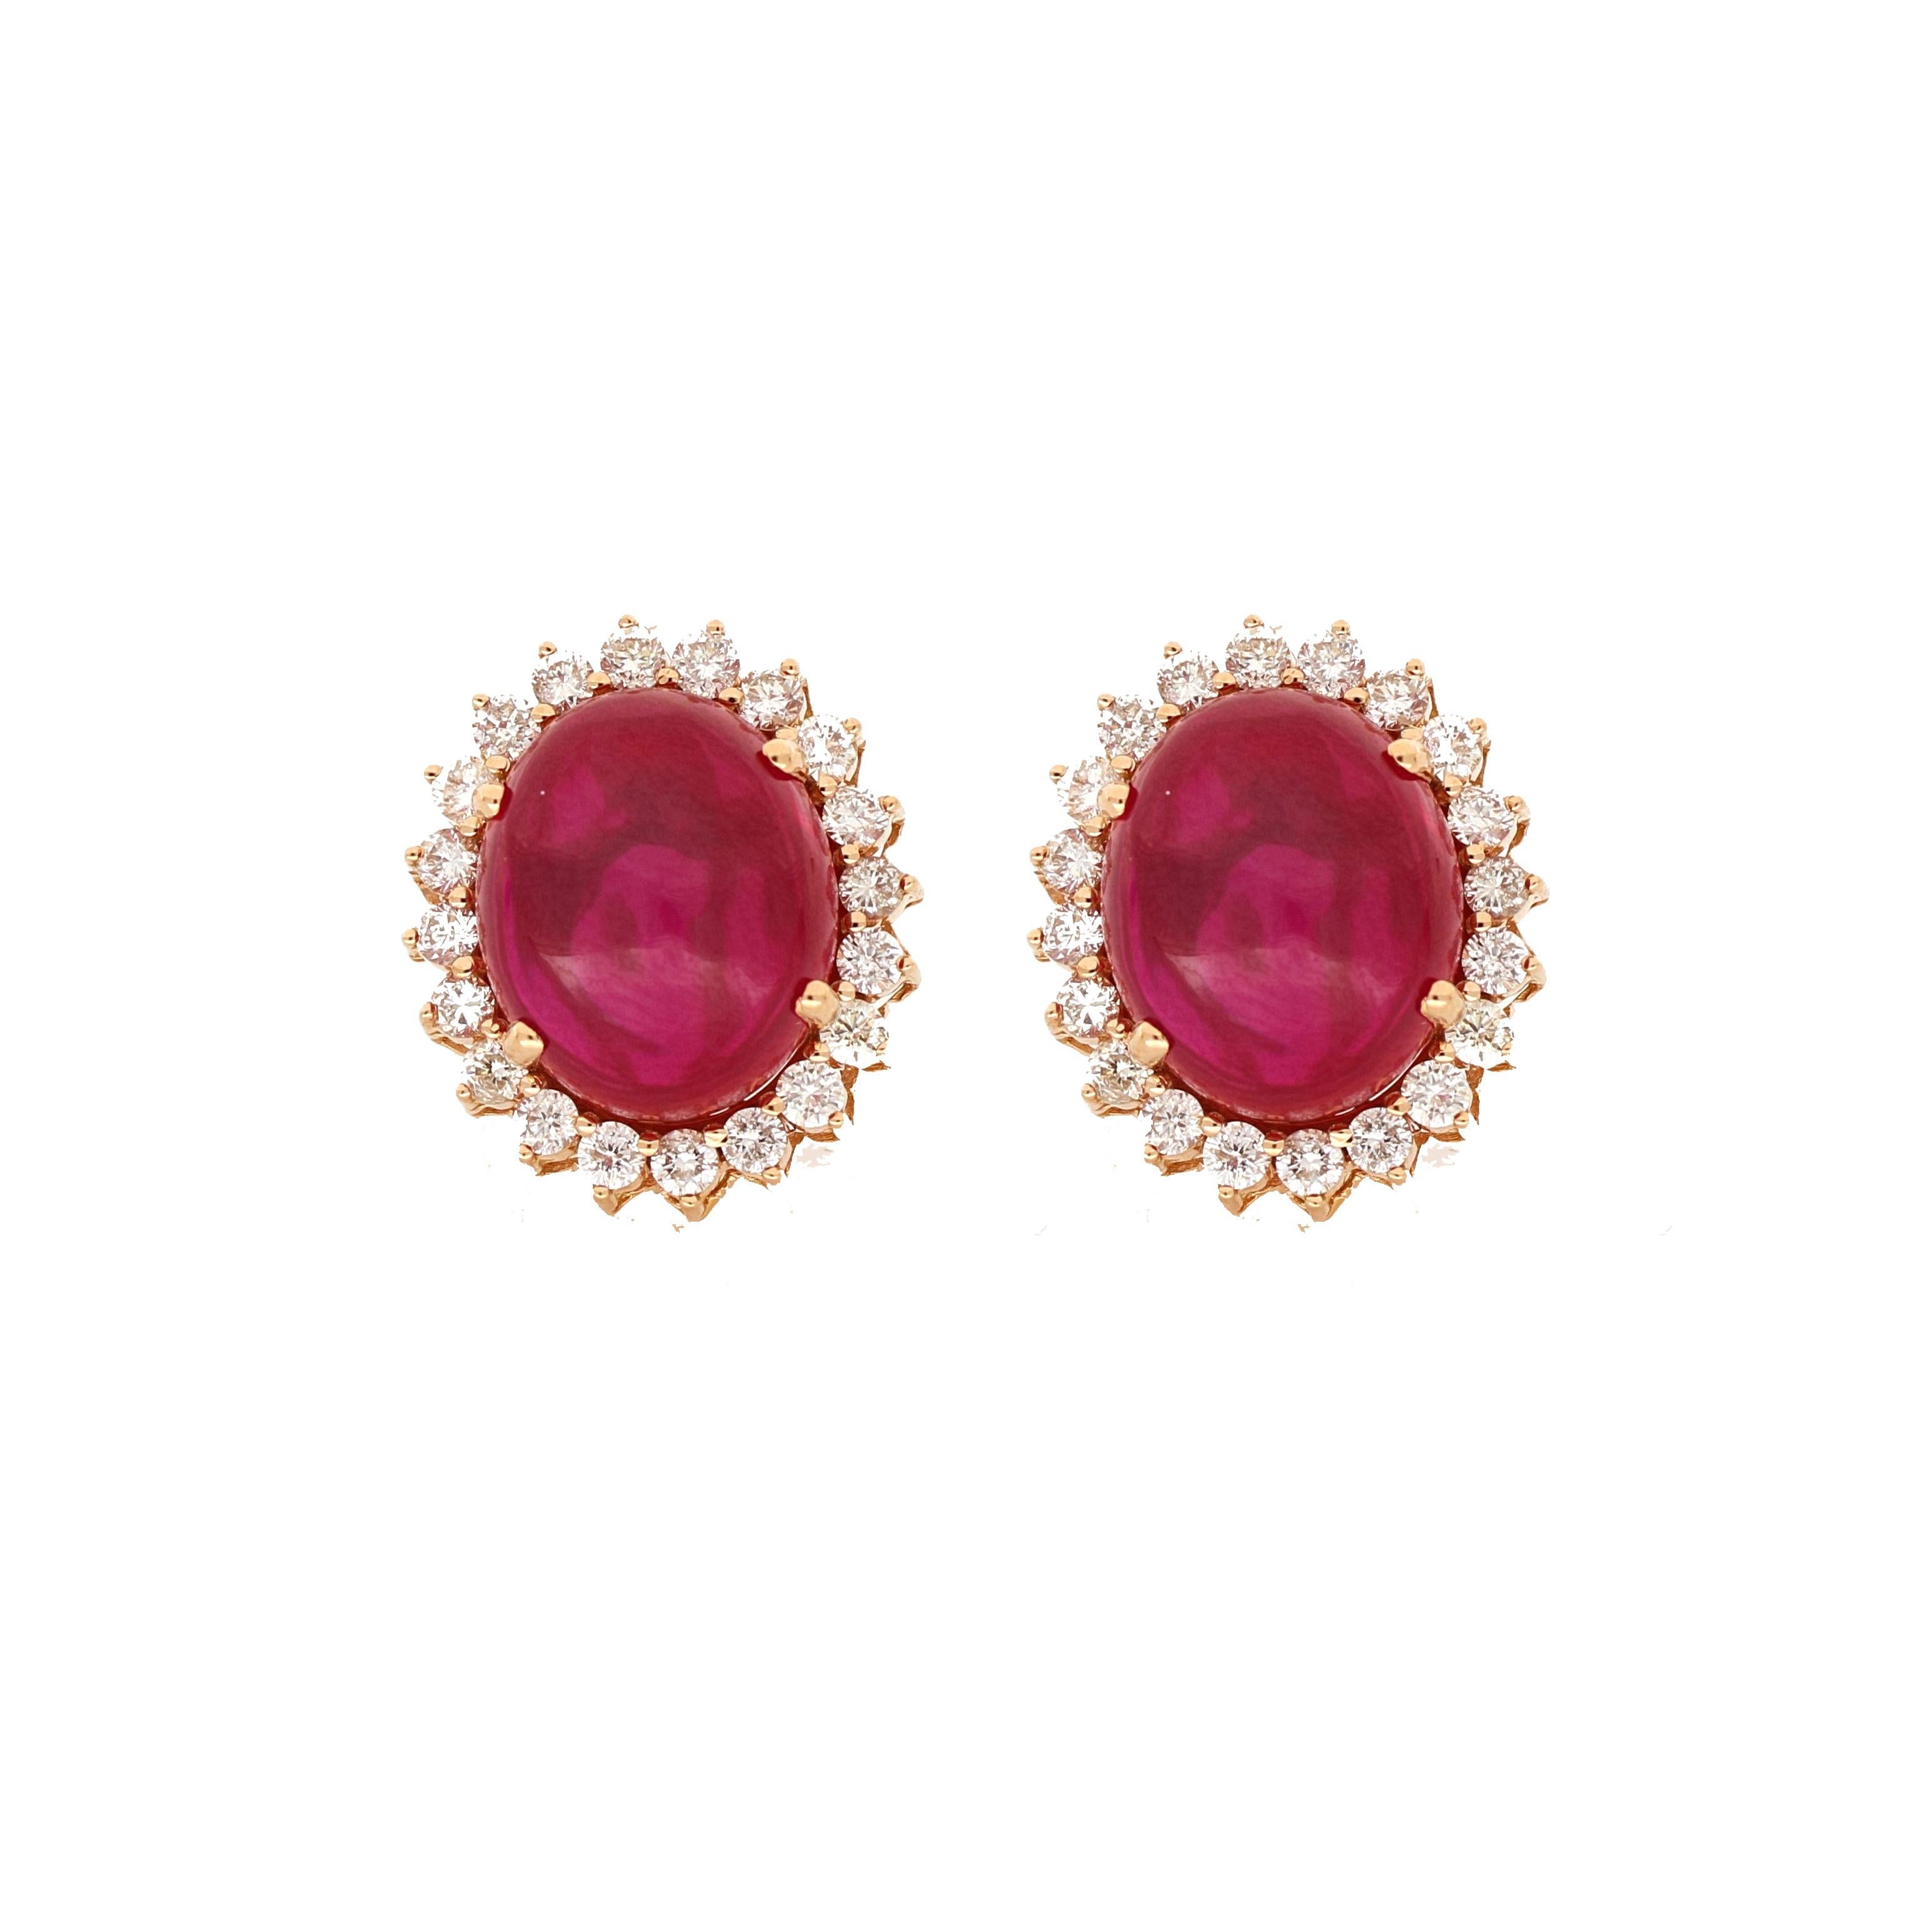 Two remarkable oval cut synthetic rubies weighing 14.45 carats have been perfectly matched in these classically elegant rose gold earrings by Amwaj jewellery, encircled by an array of sleek round cut diamonds.
Diamonds (Total Carat Weight: 1.03 ct)